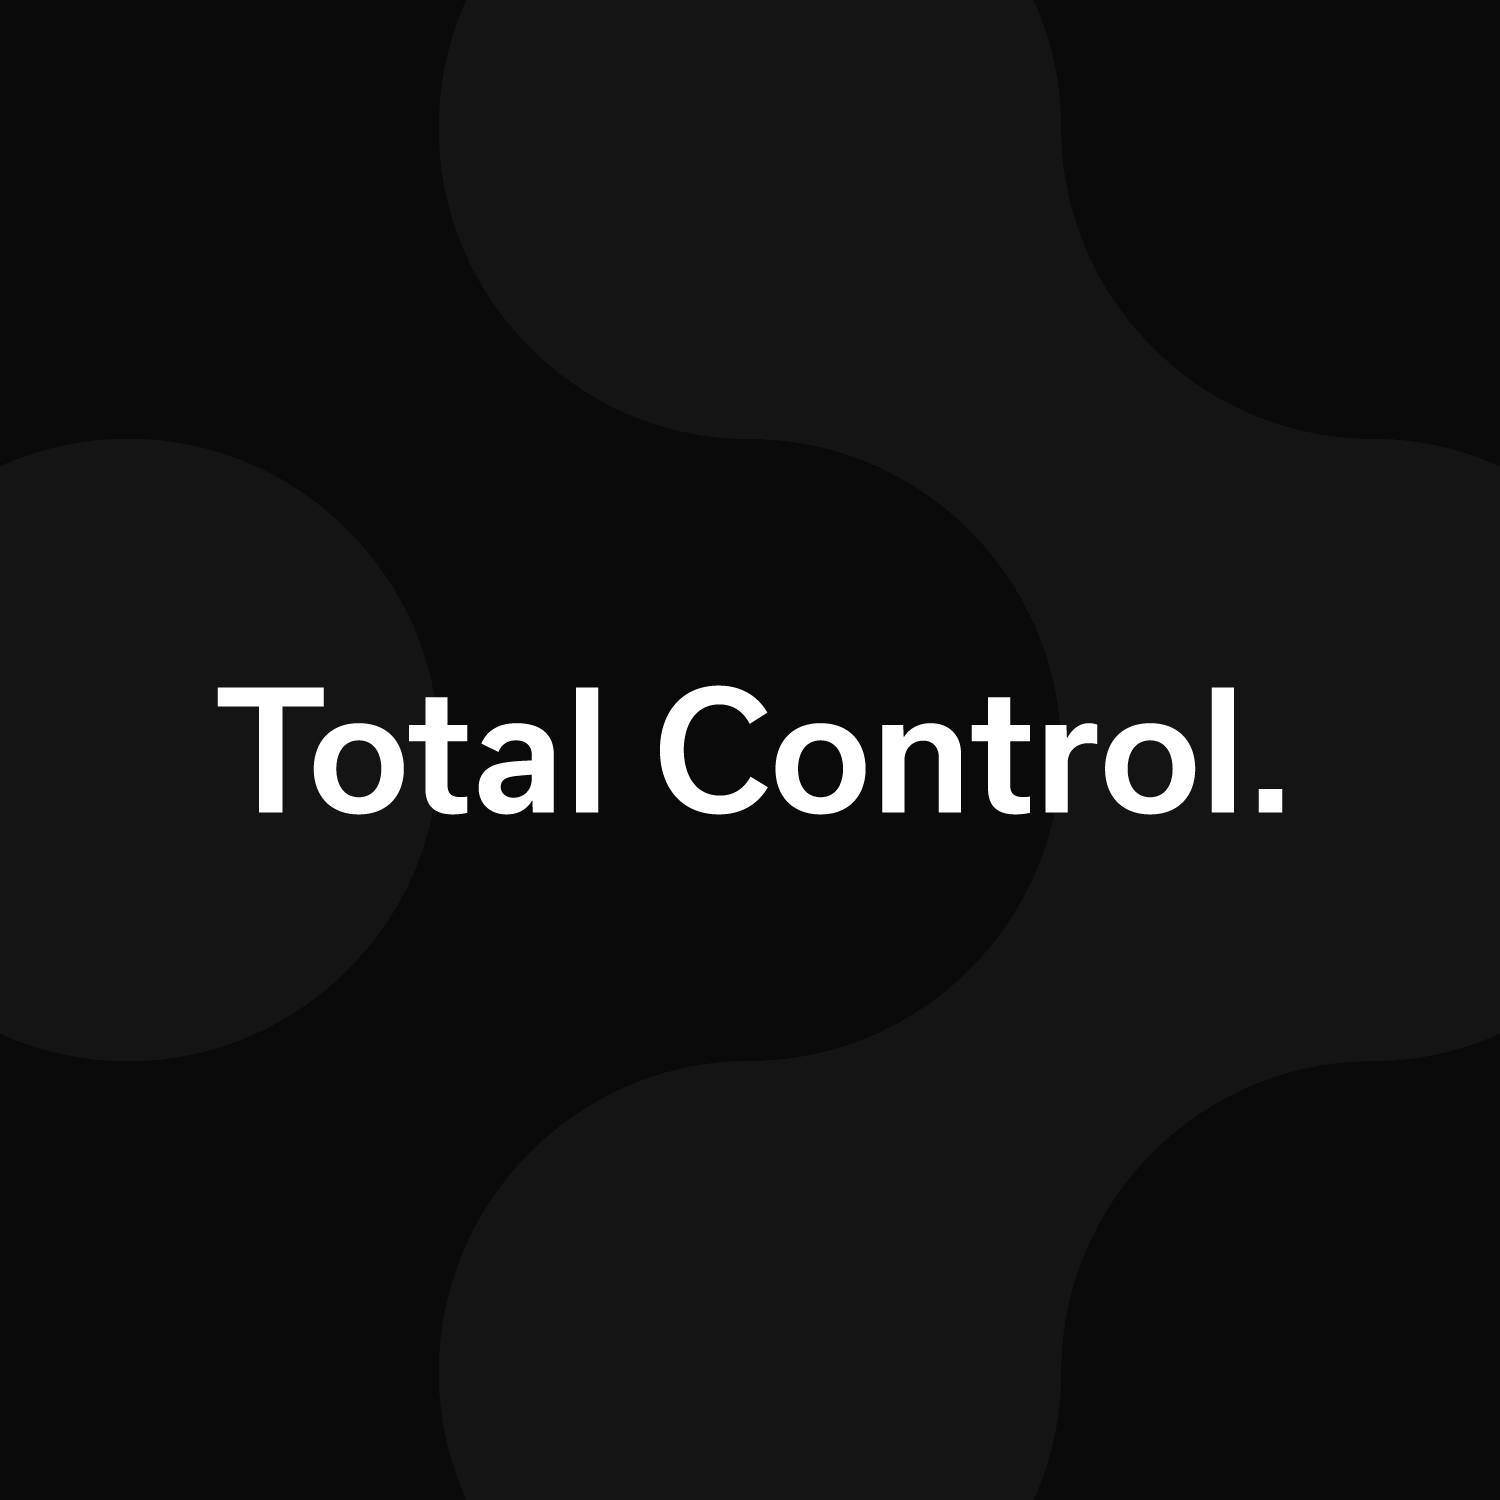 Bolt's brand promise of 'Total Control', in white text on a black background